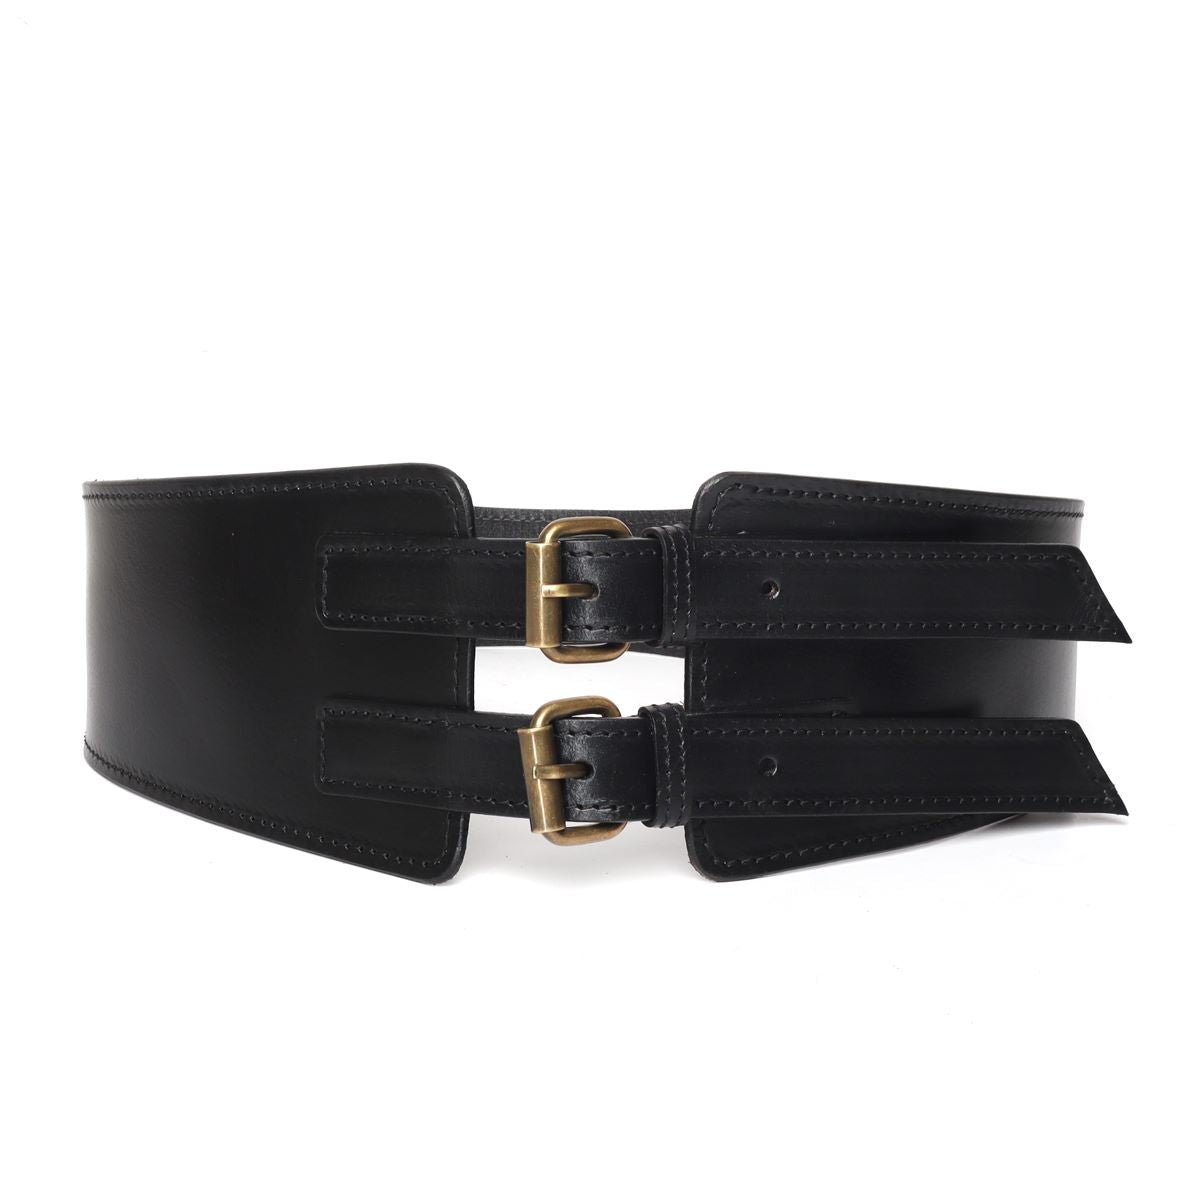 Double Buckle Corset Black Leather Belt With Golden Buckle By Brune & Bareskin L